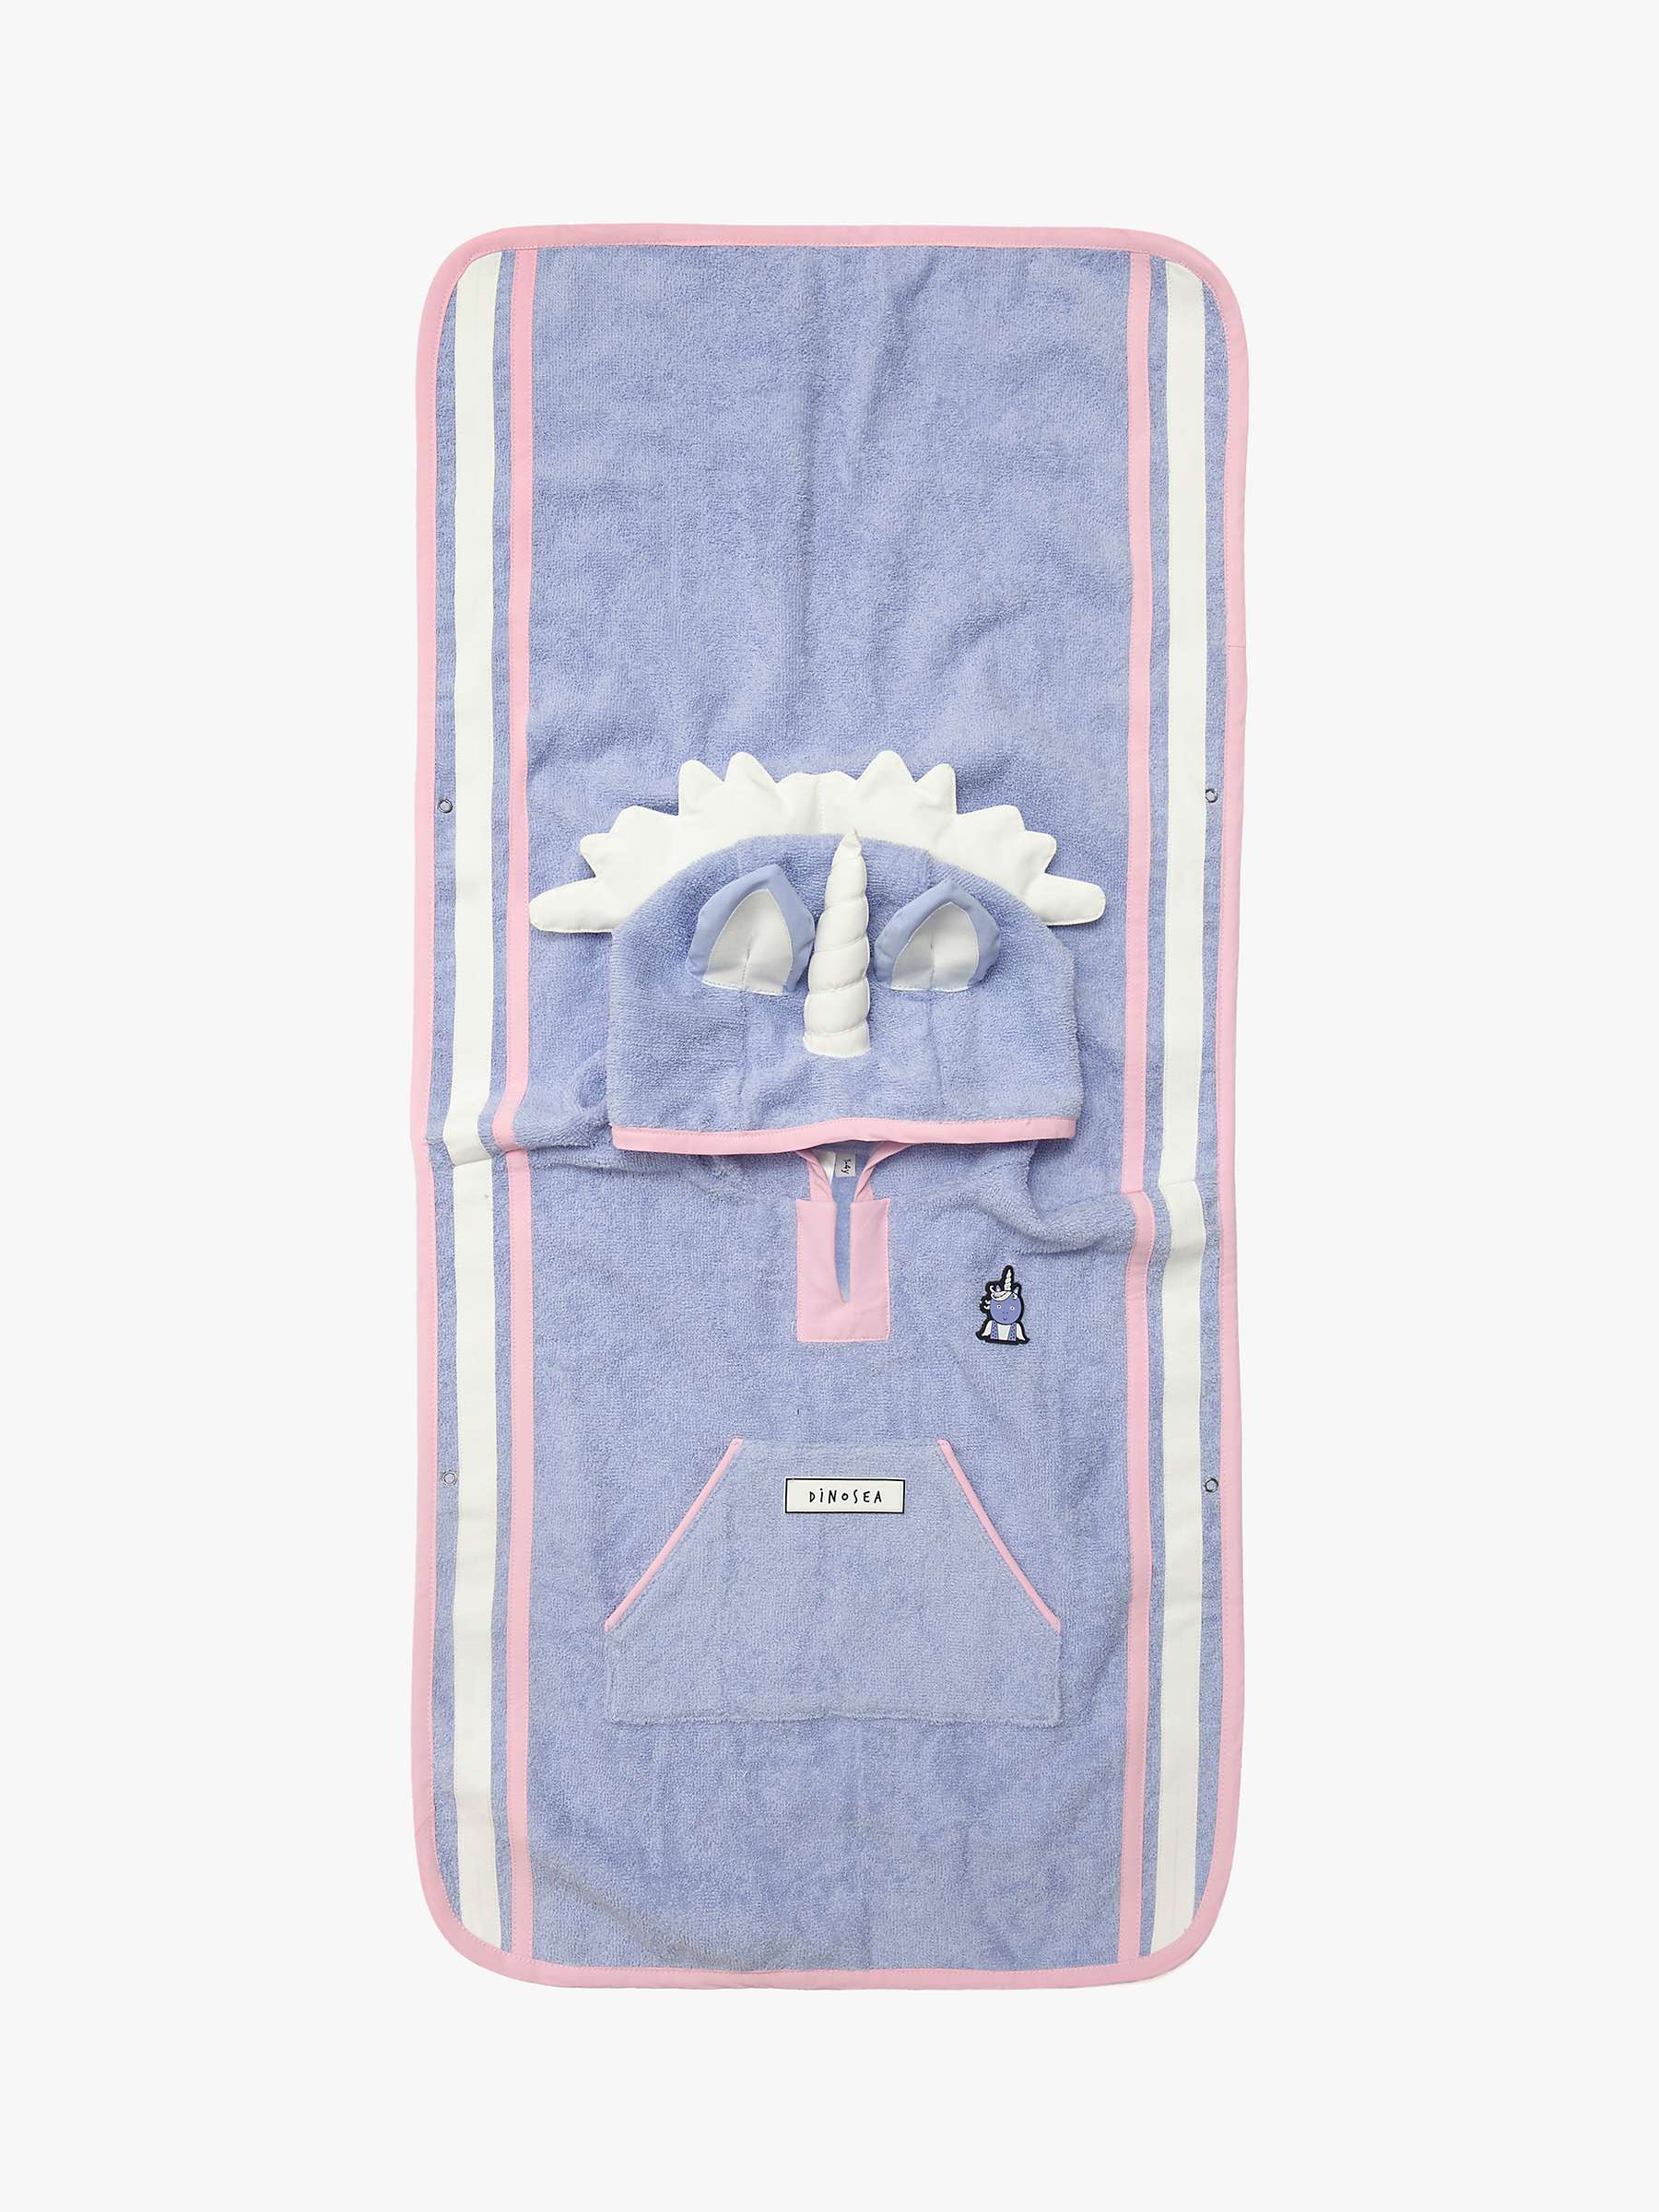 Buy Roarsome Kids' Sparkle Unicorn Beach Towelling Poncho, Lilac Online at johnlewis.com